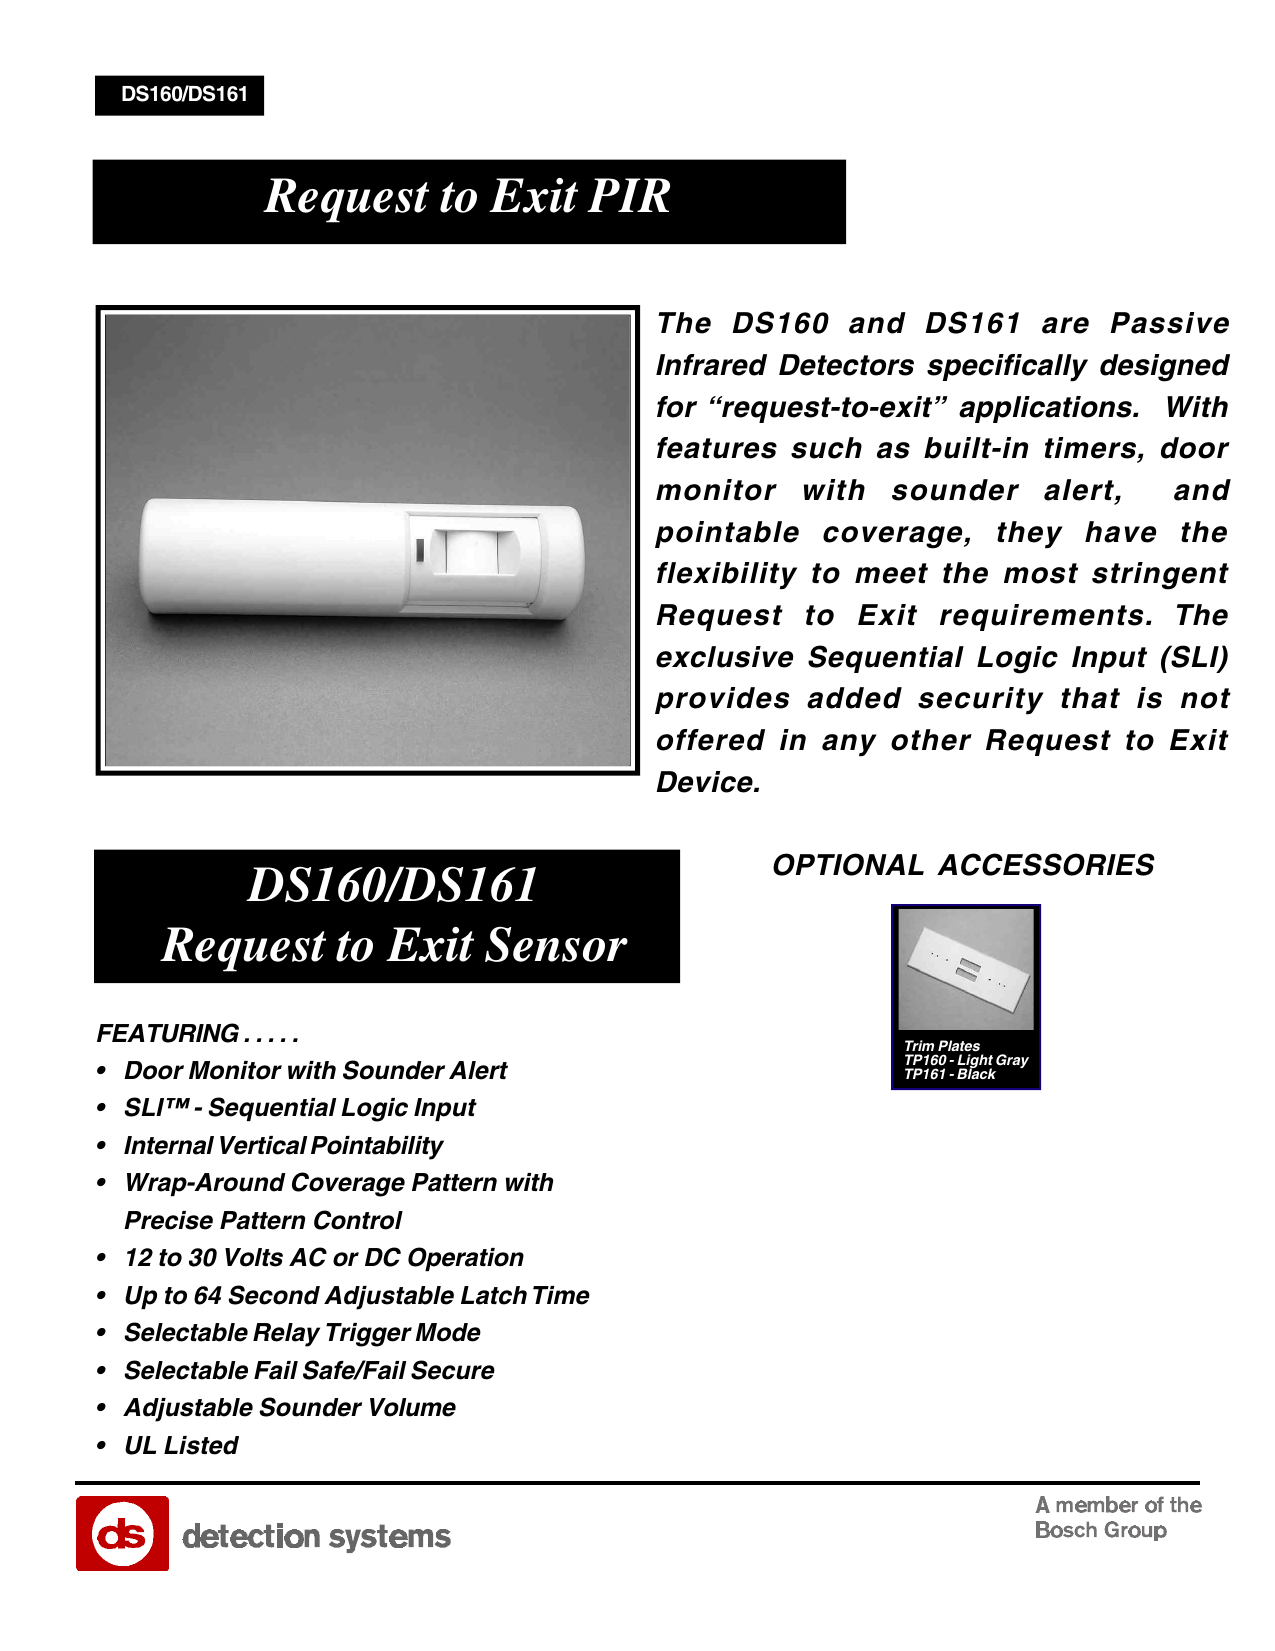 Bosch DS160 High Performance Request-to-Exit Passive Infrared Detector V3.00 